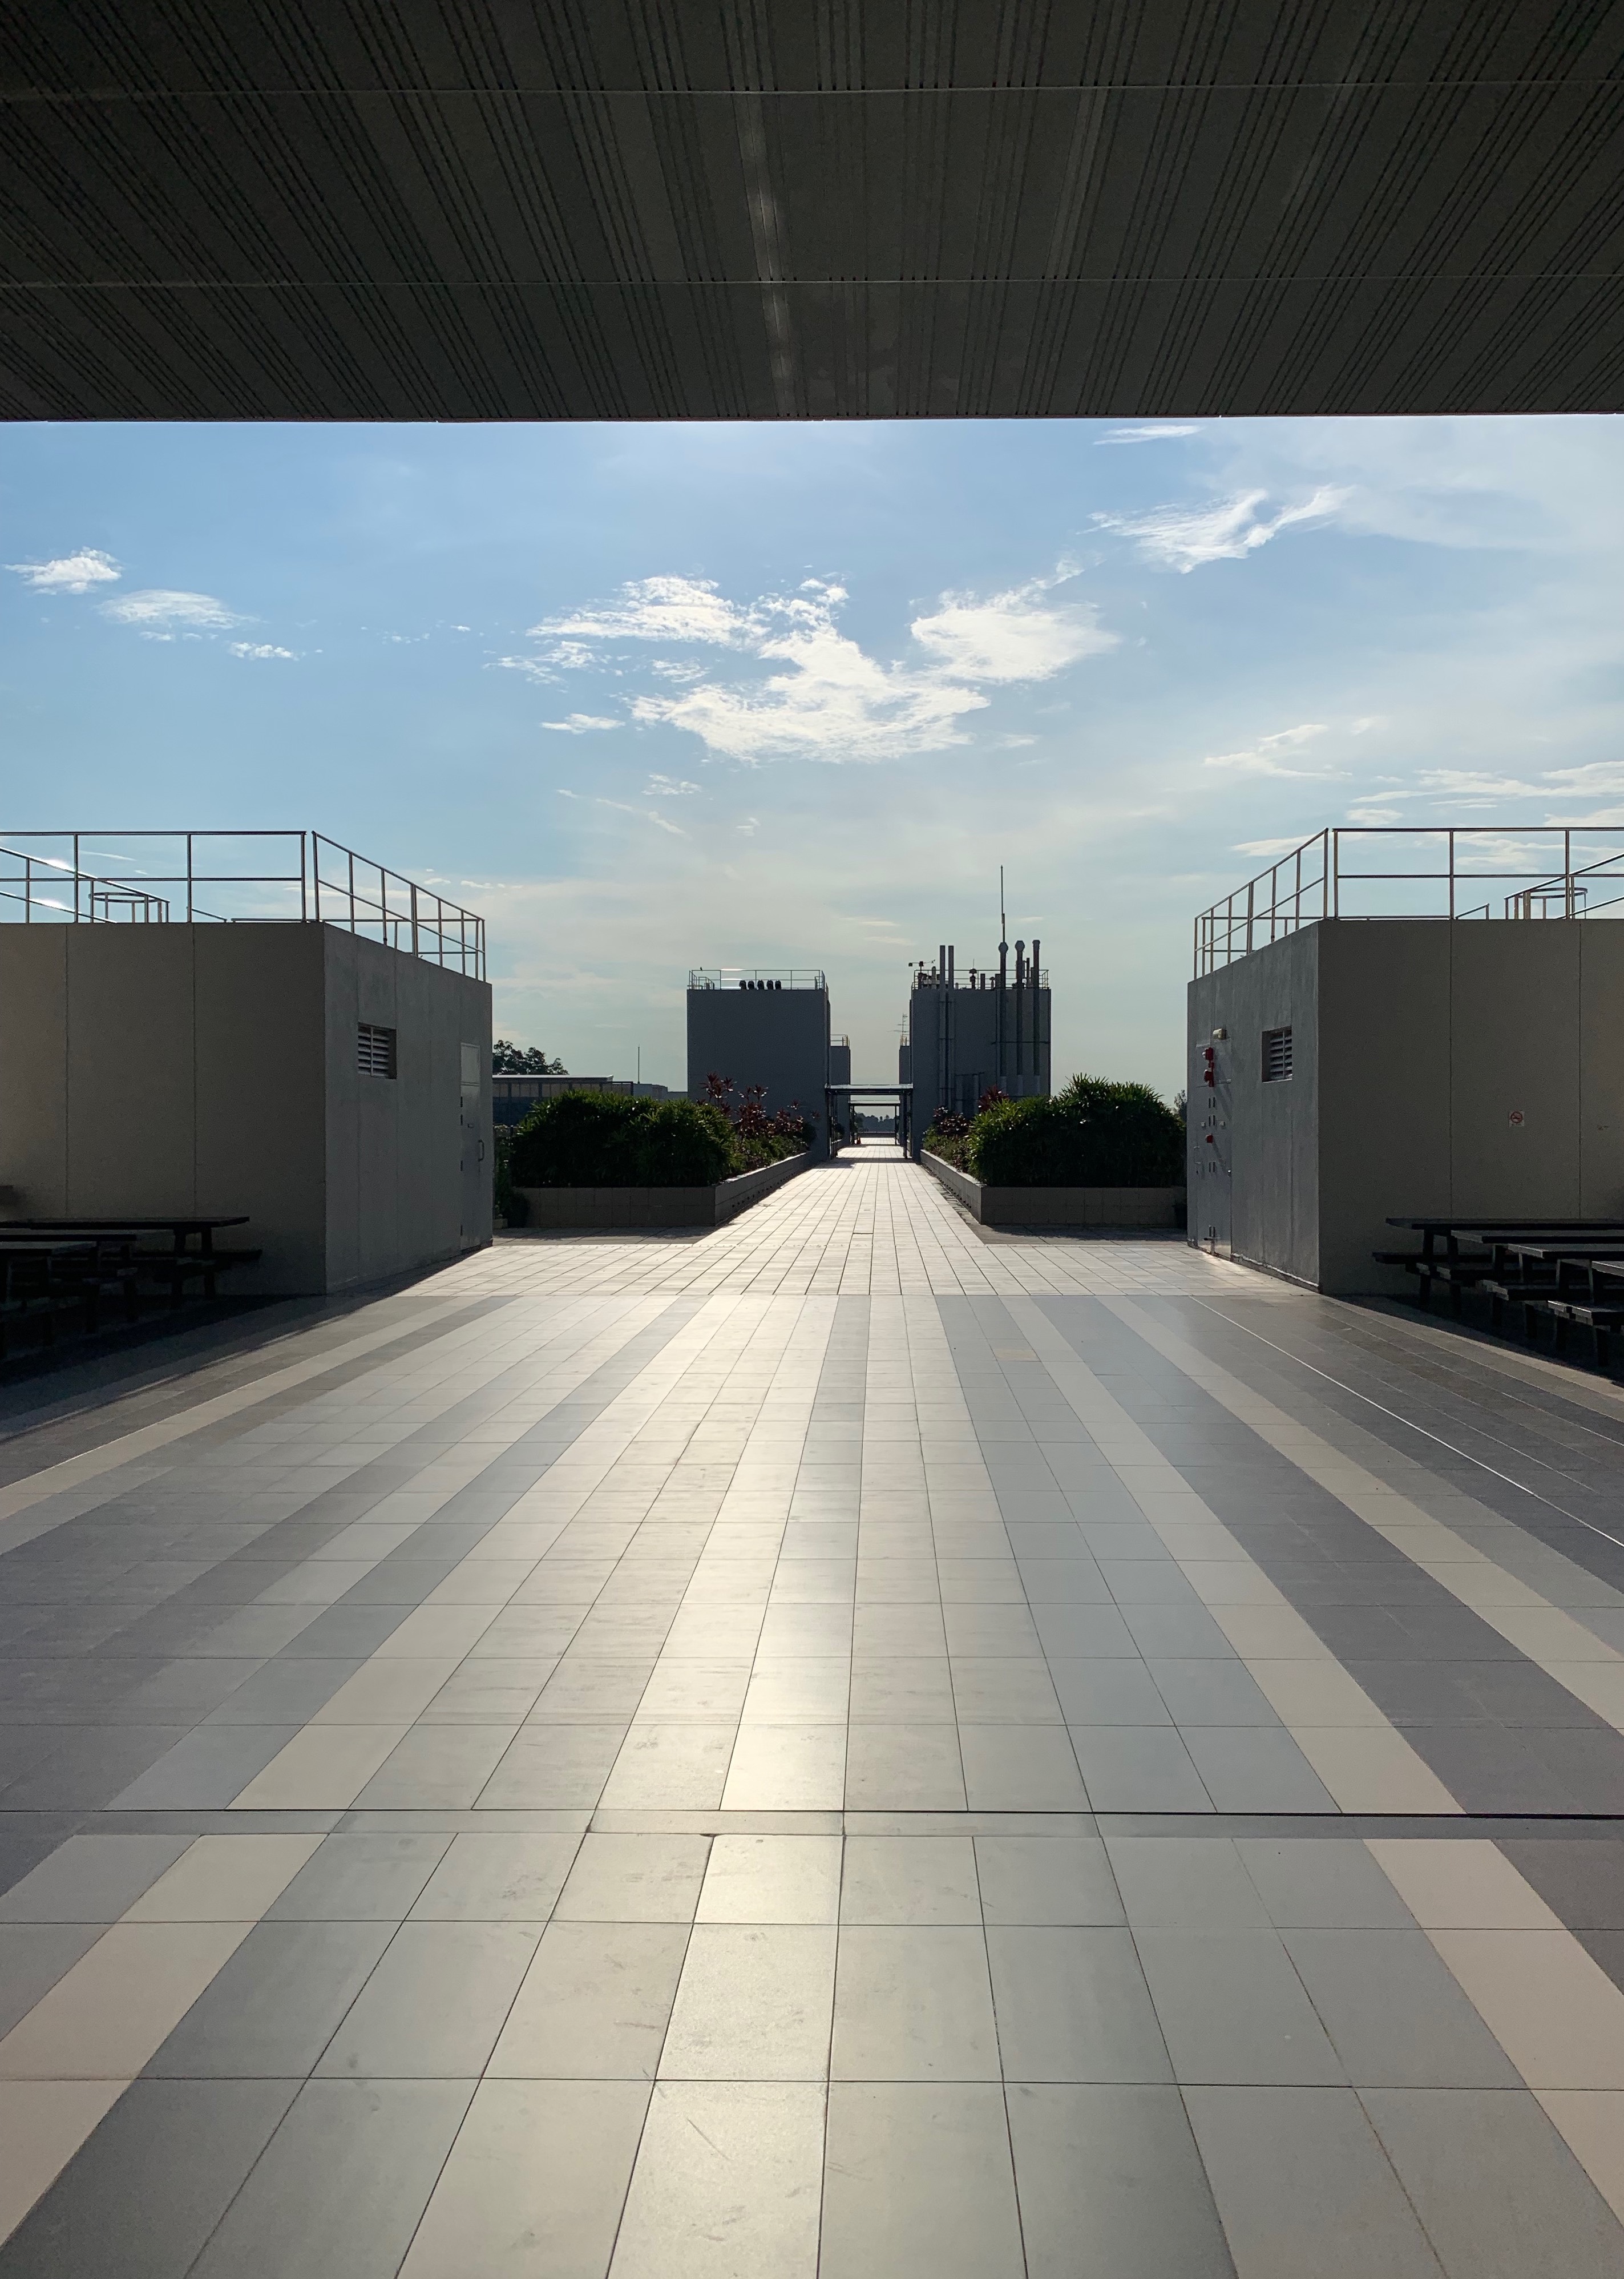 On the roof of the North Spine at NTU, Singapore 2019.